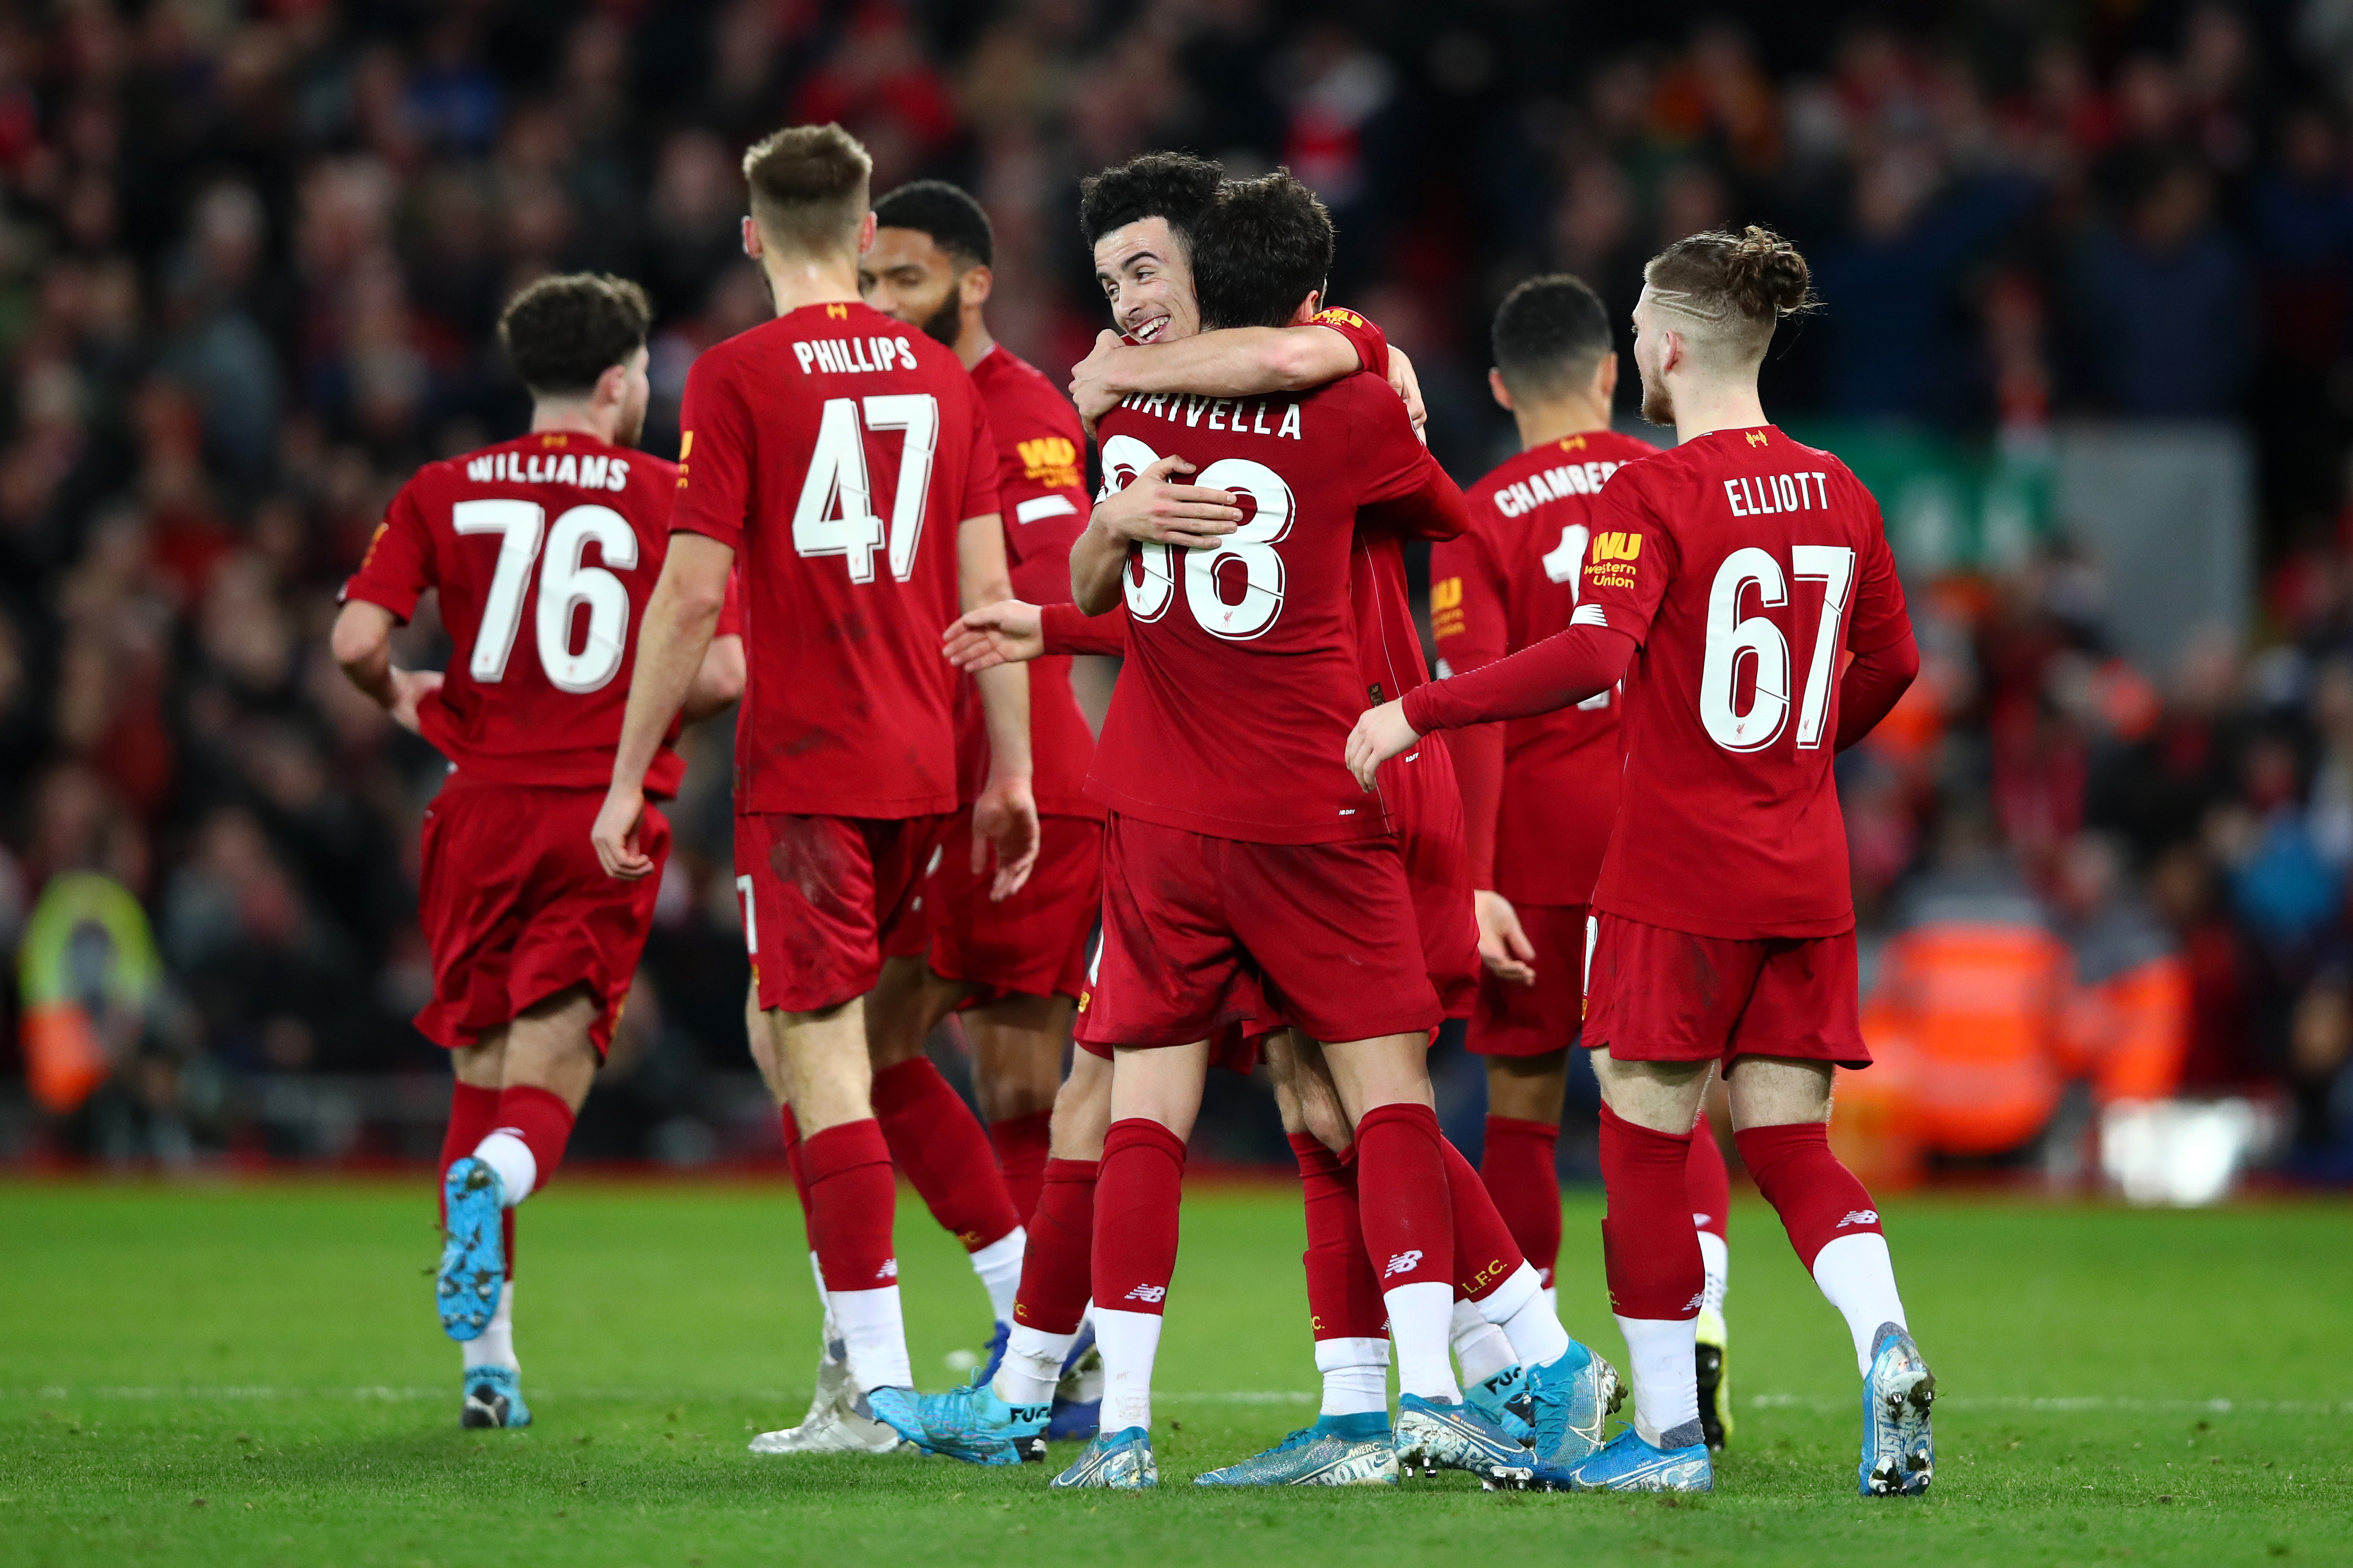 LIVERPOOL, ENGLAND - JANUARY 05: Curtis Jones of Liverpool celebrates with teammates after scoring his team's first goal during the FA Cup Third Round match between Liverpool and Everton at Anfield on January 05, 2020 in Liverpool, England. (Photo by Clive Brunskill/Getty Images)